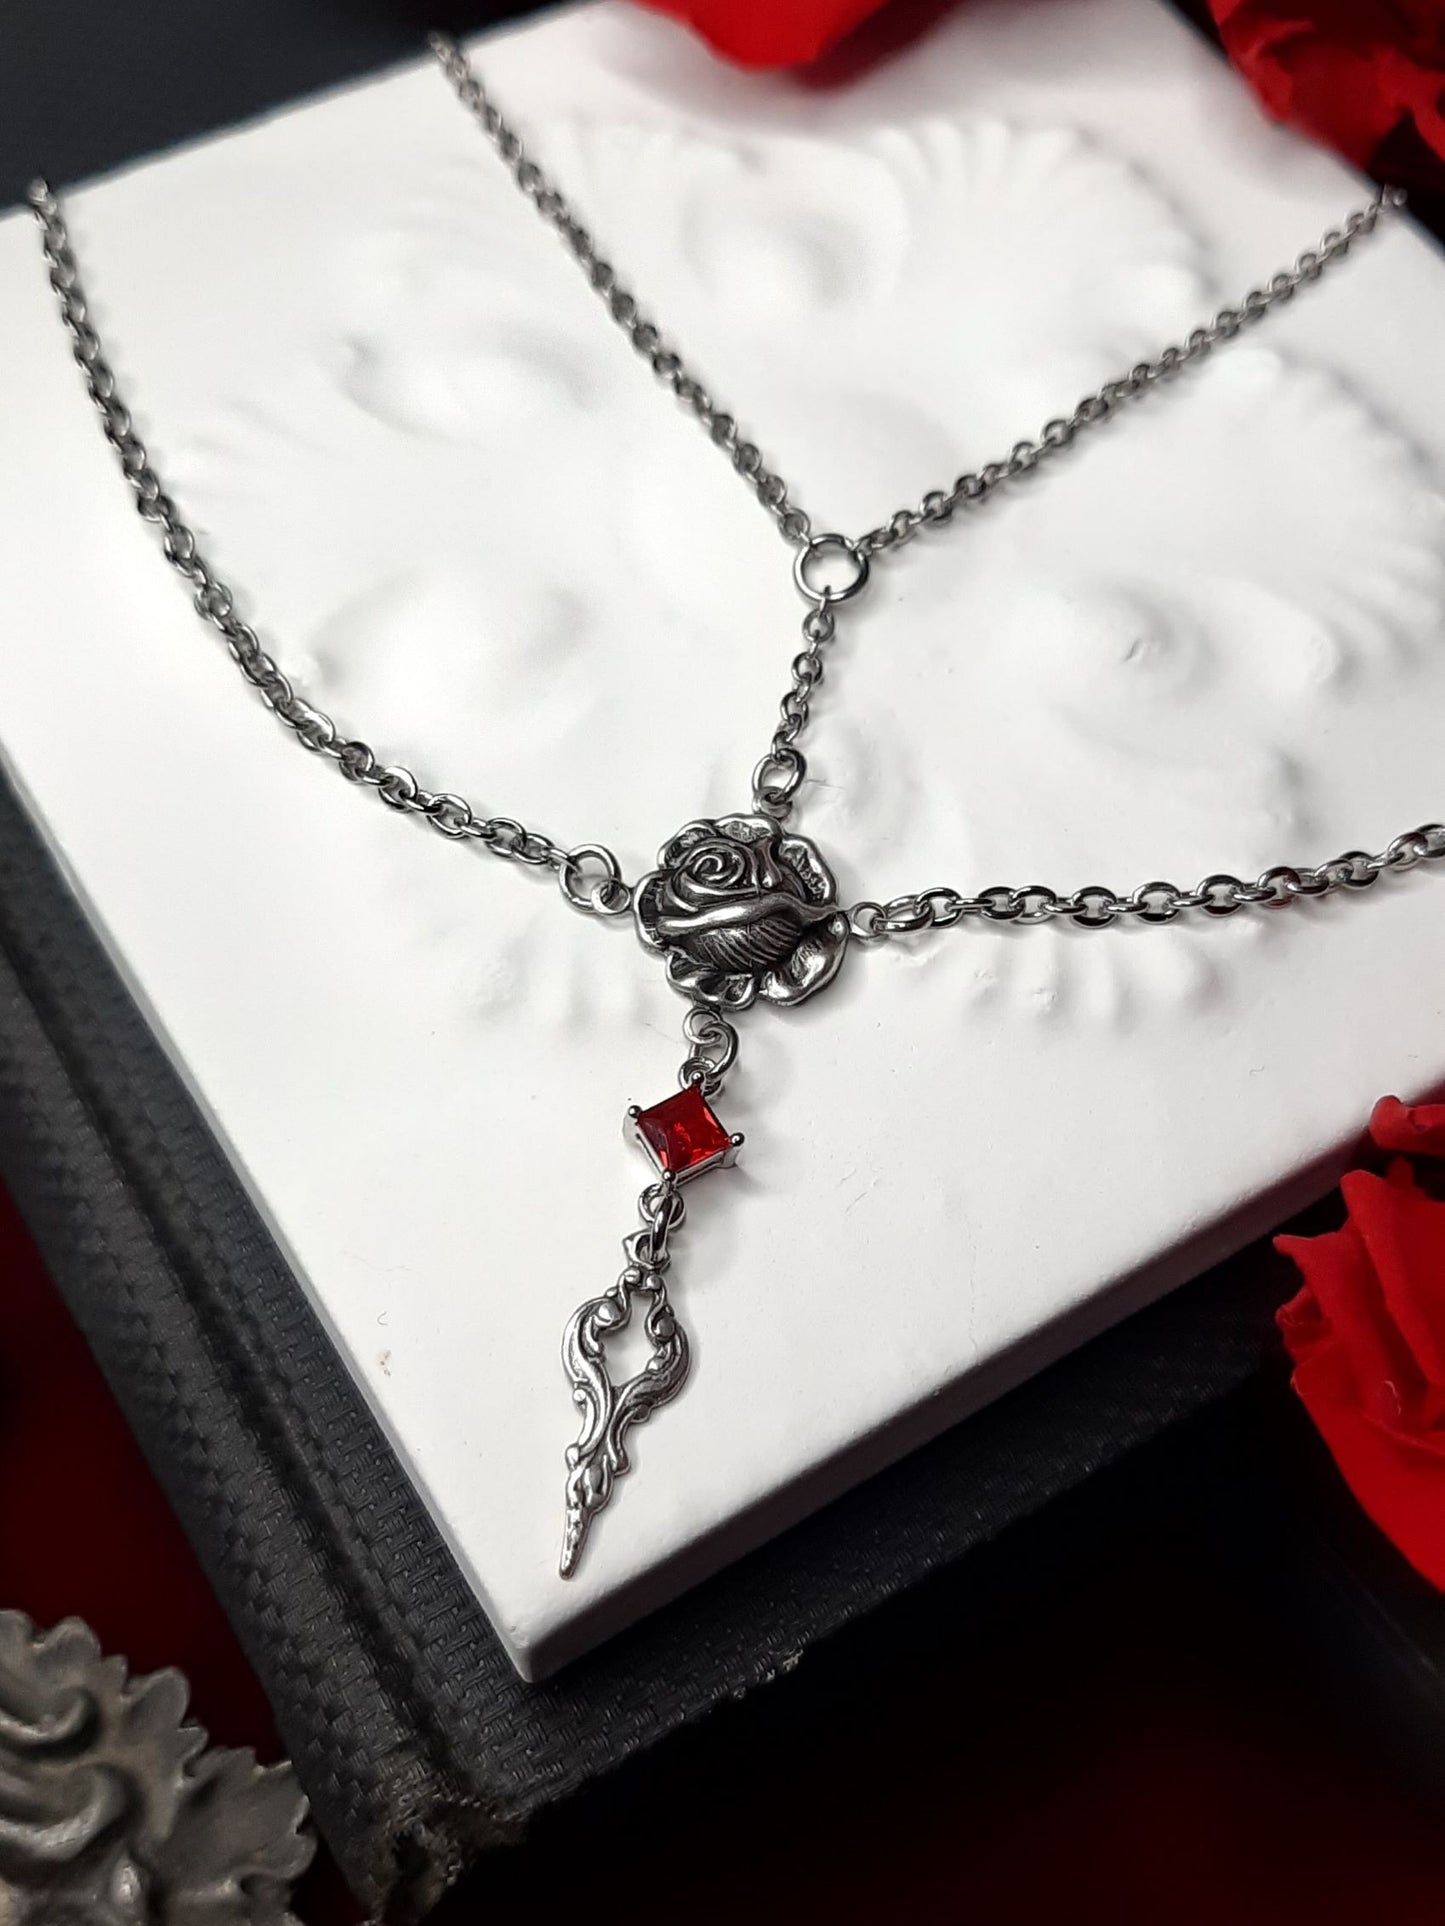 𝕻𝖔𝖎𝖘𝖊 rose double necklace- 𝖔𝖓𝖊 𝖑𝖊𝖋𝖙 !